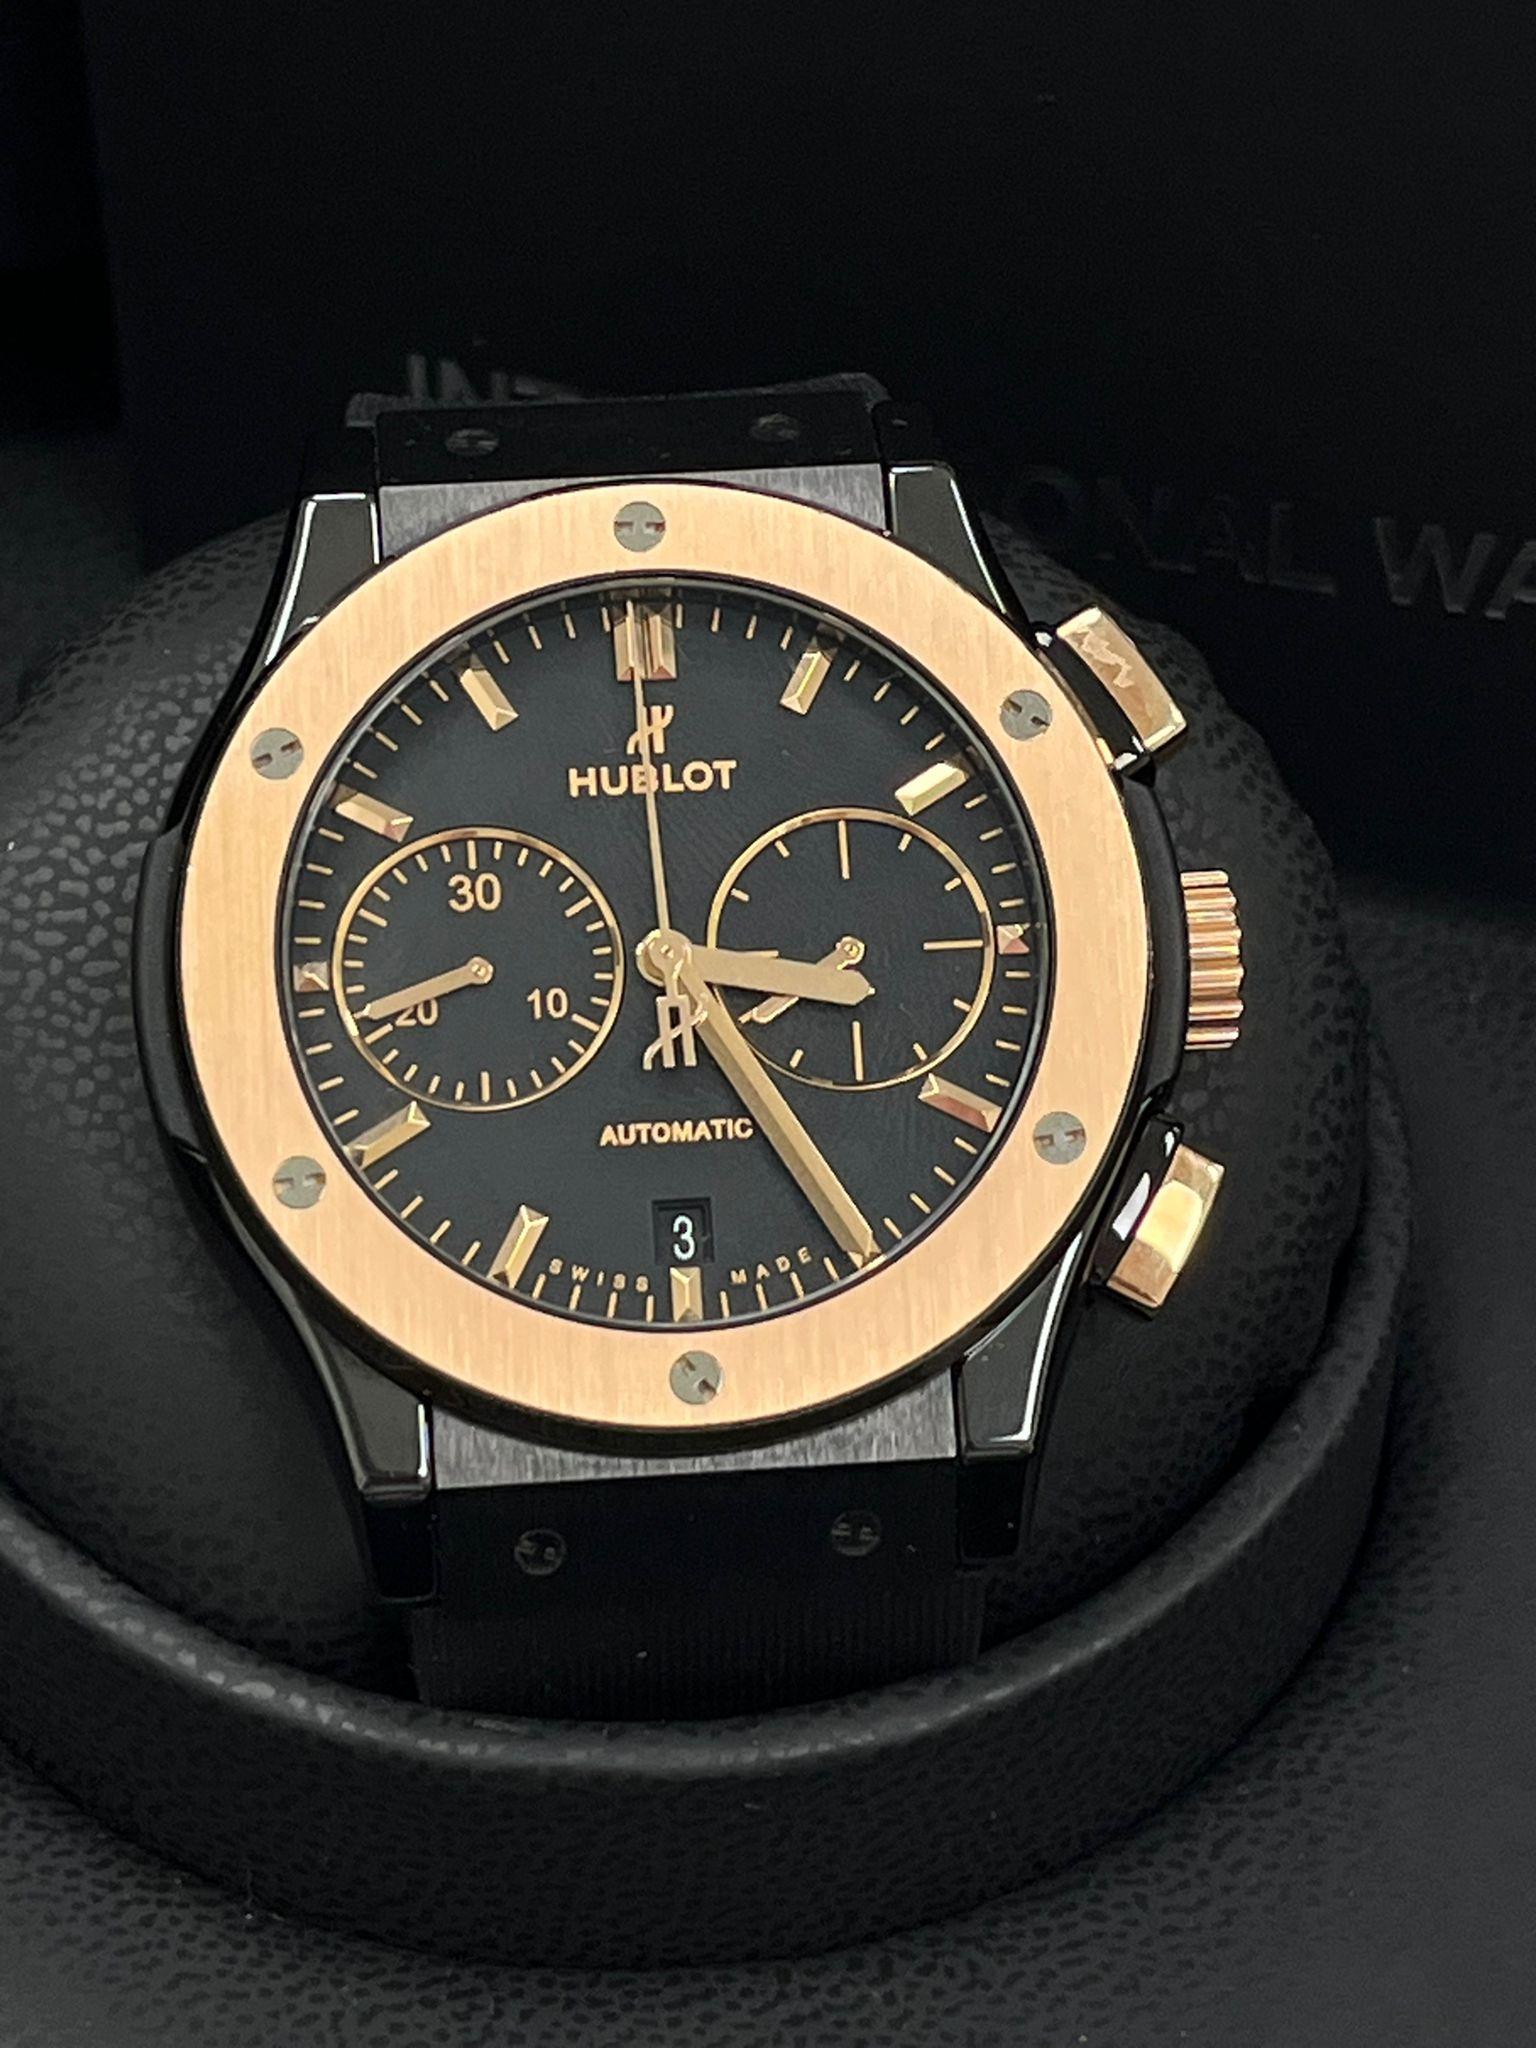 Hublot Classic Fusion Chronograph Ceramic King Gold 45mm Watch 521.CO.1181.RX For Sale 2